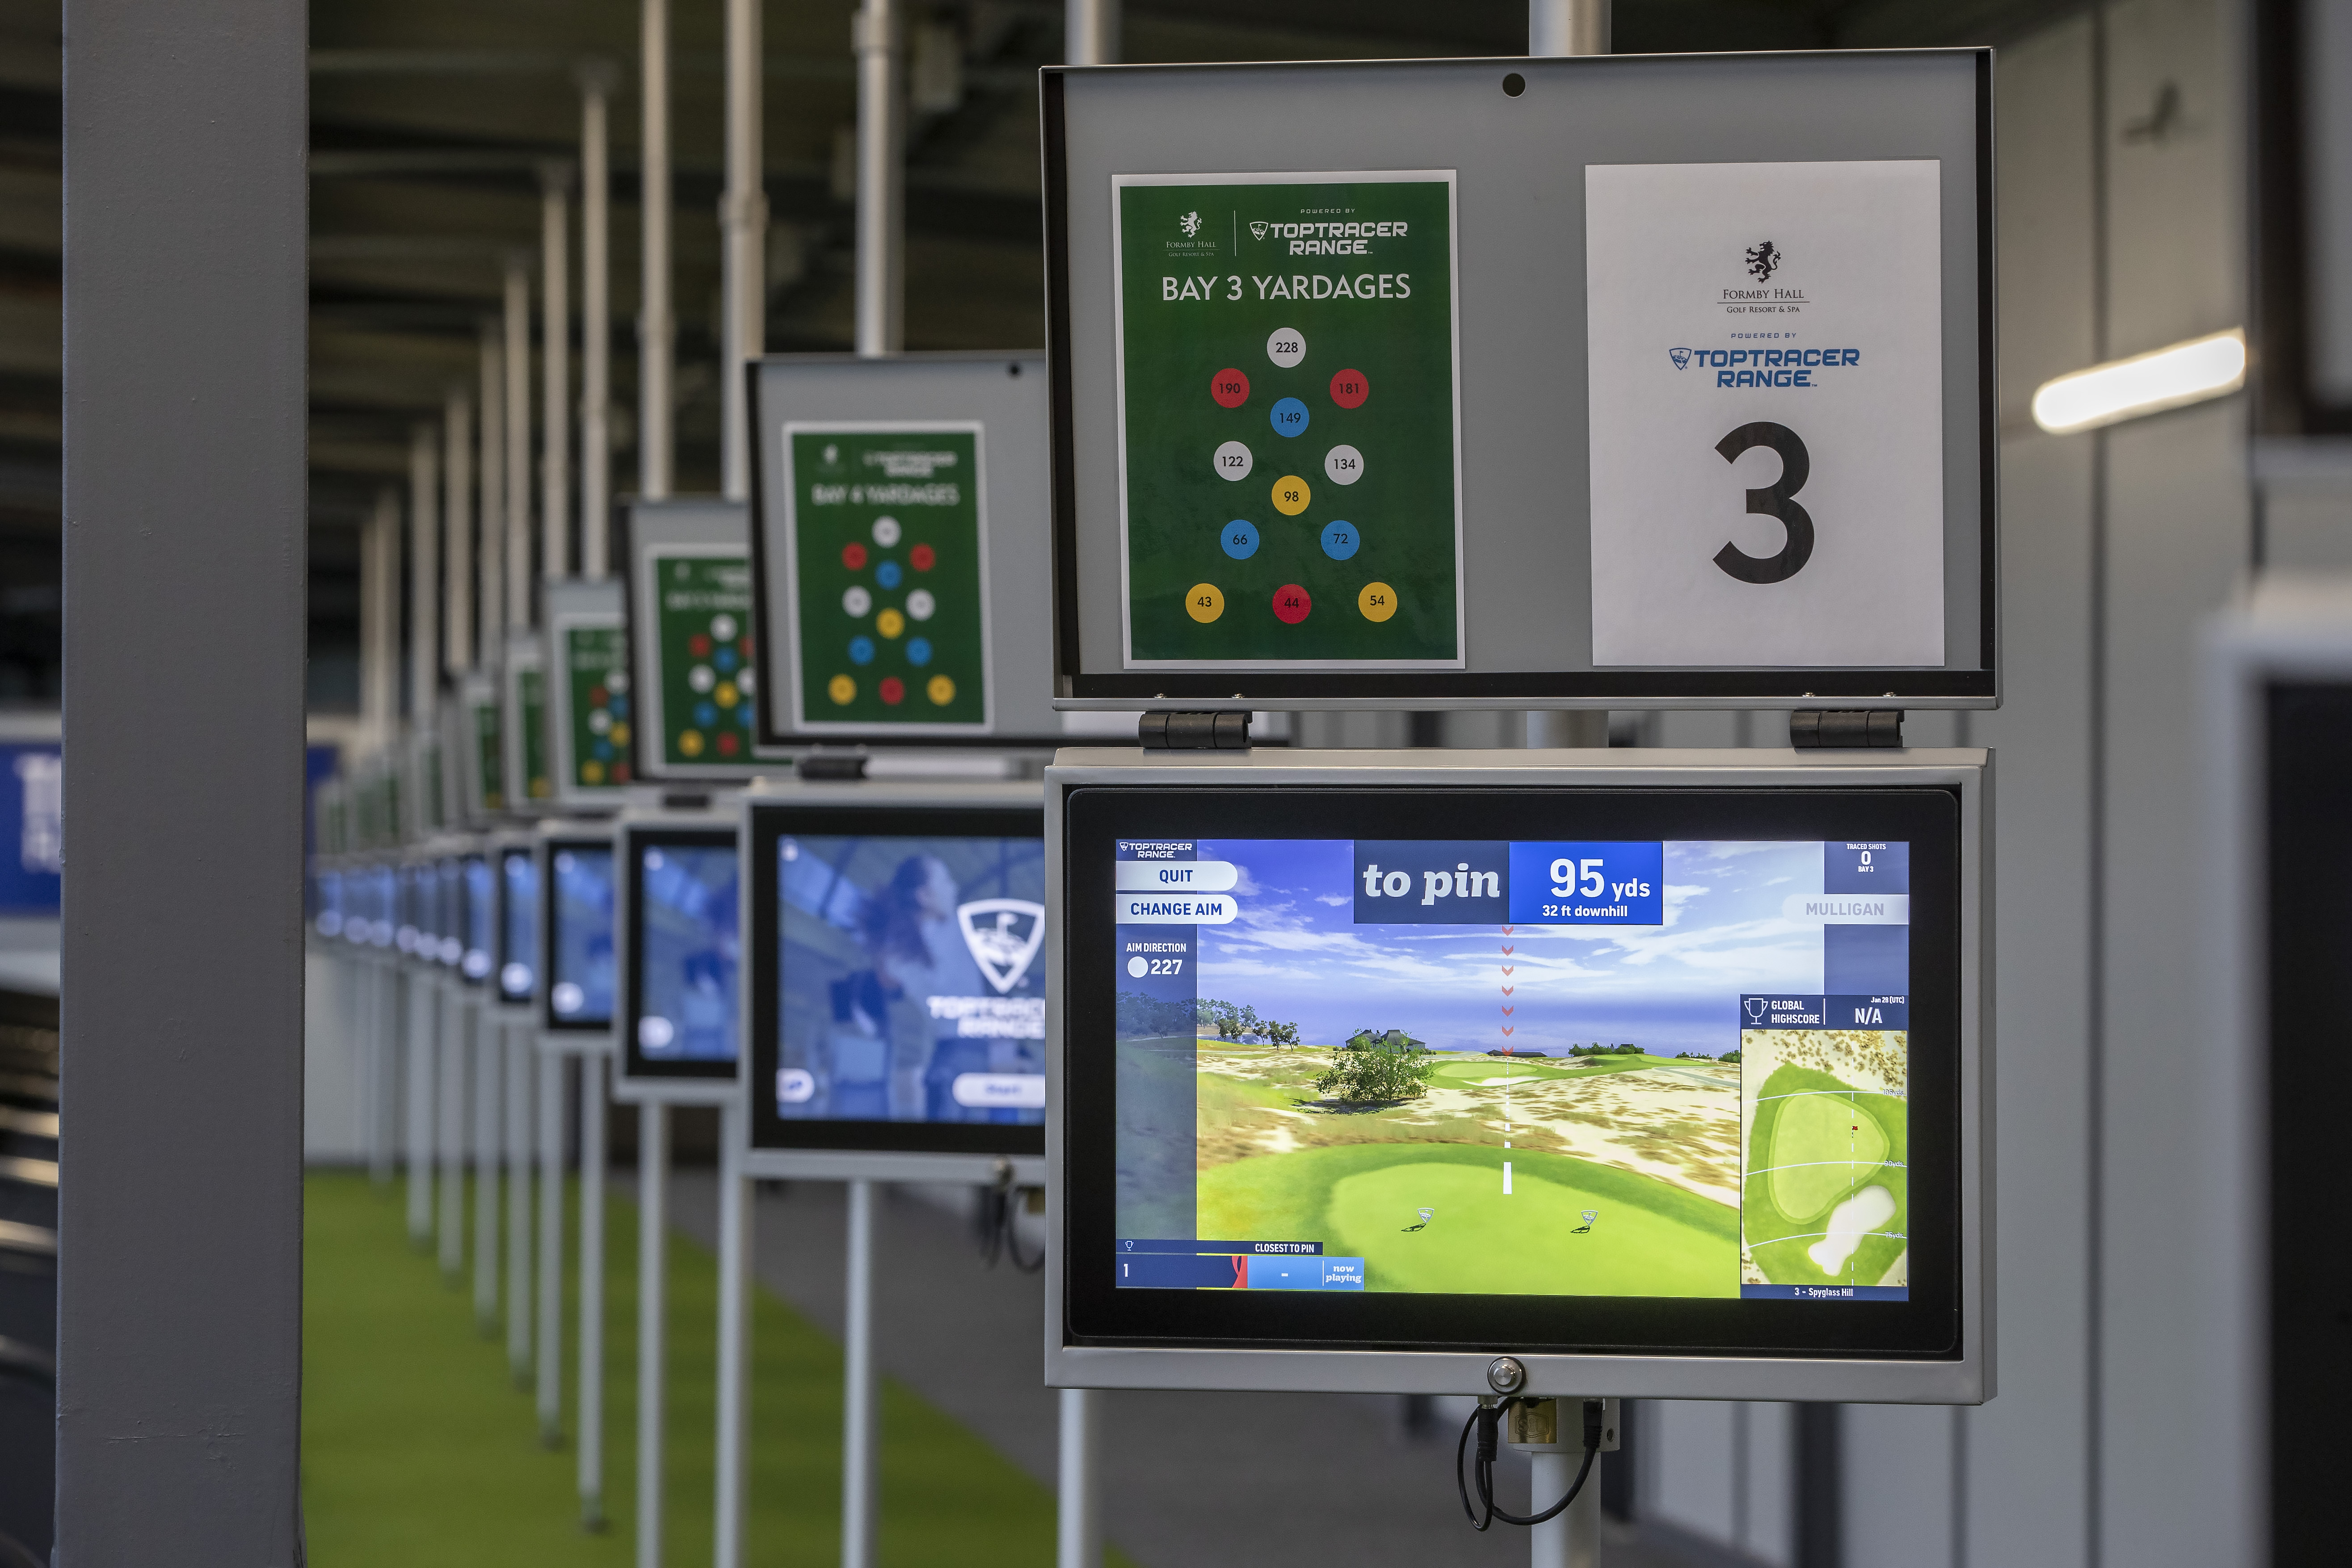 Cambridge Golf Driving Range - Fathers Day Golf lesson Gift vouchers  available from £30/30mins or “3for2” special offer. Order online or call in  at the Golf range http://dsgolf.co.uk/golf-lessons/ | Facebook